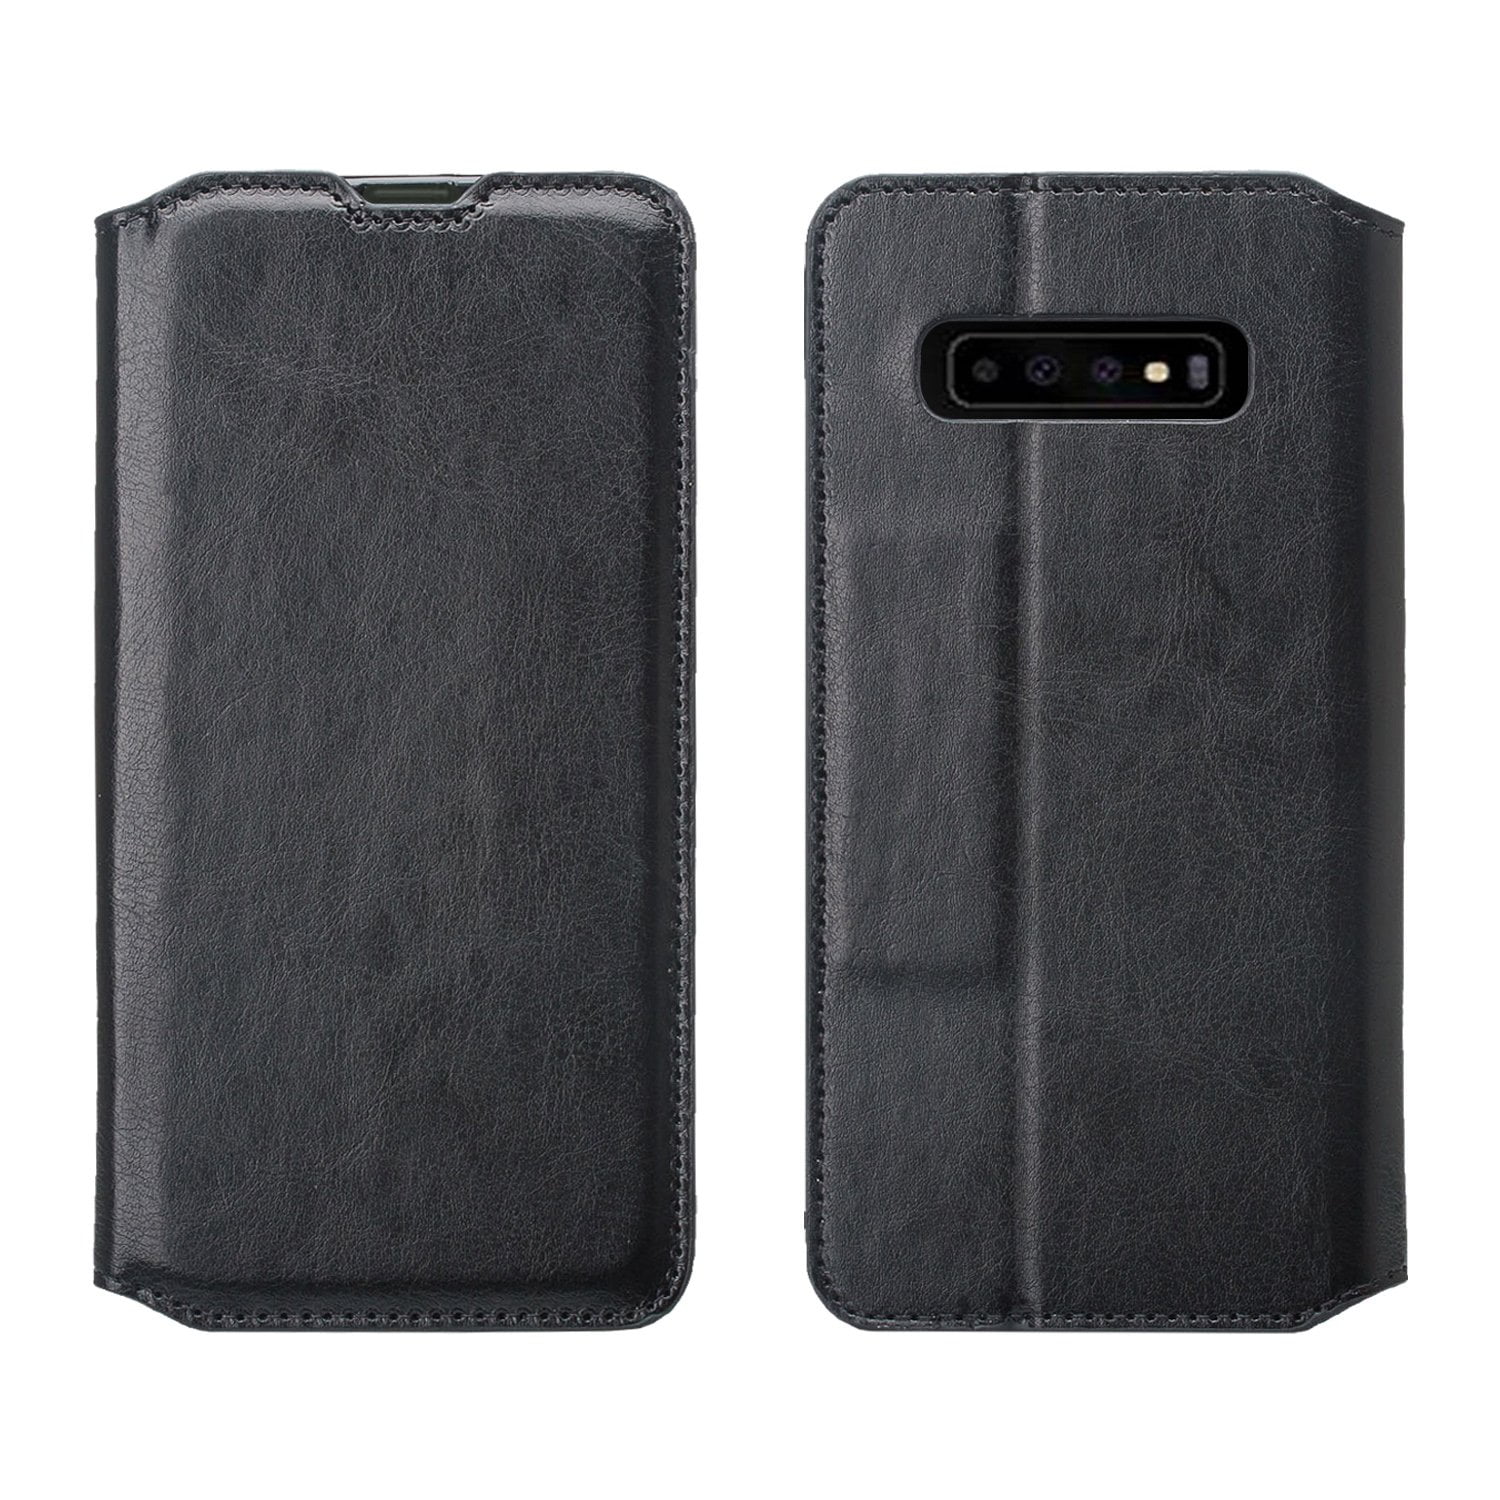 Stylish Cover Compatible with Samsung Galaxy S10 Plus Grey Leather Flip Case Wallet for Samsung Galaxy S10 Plus